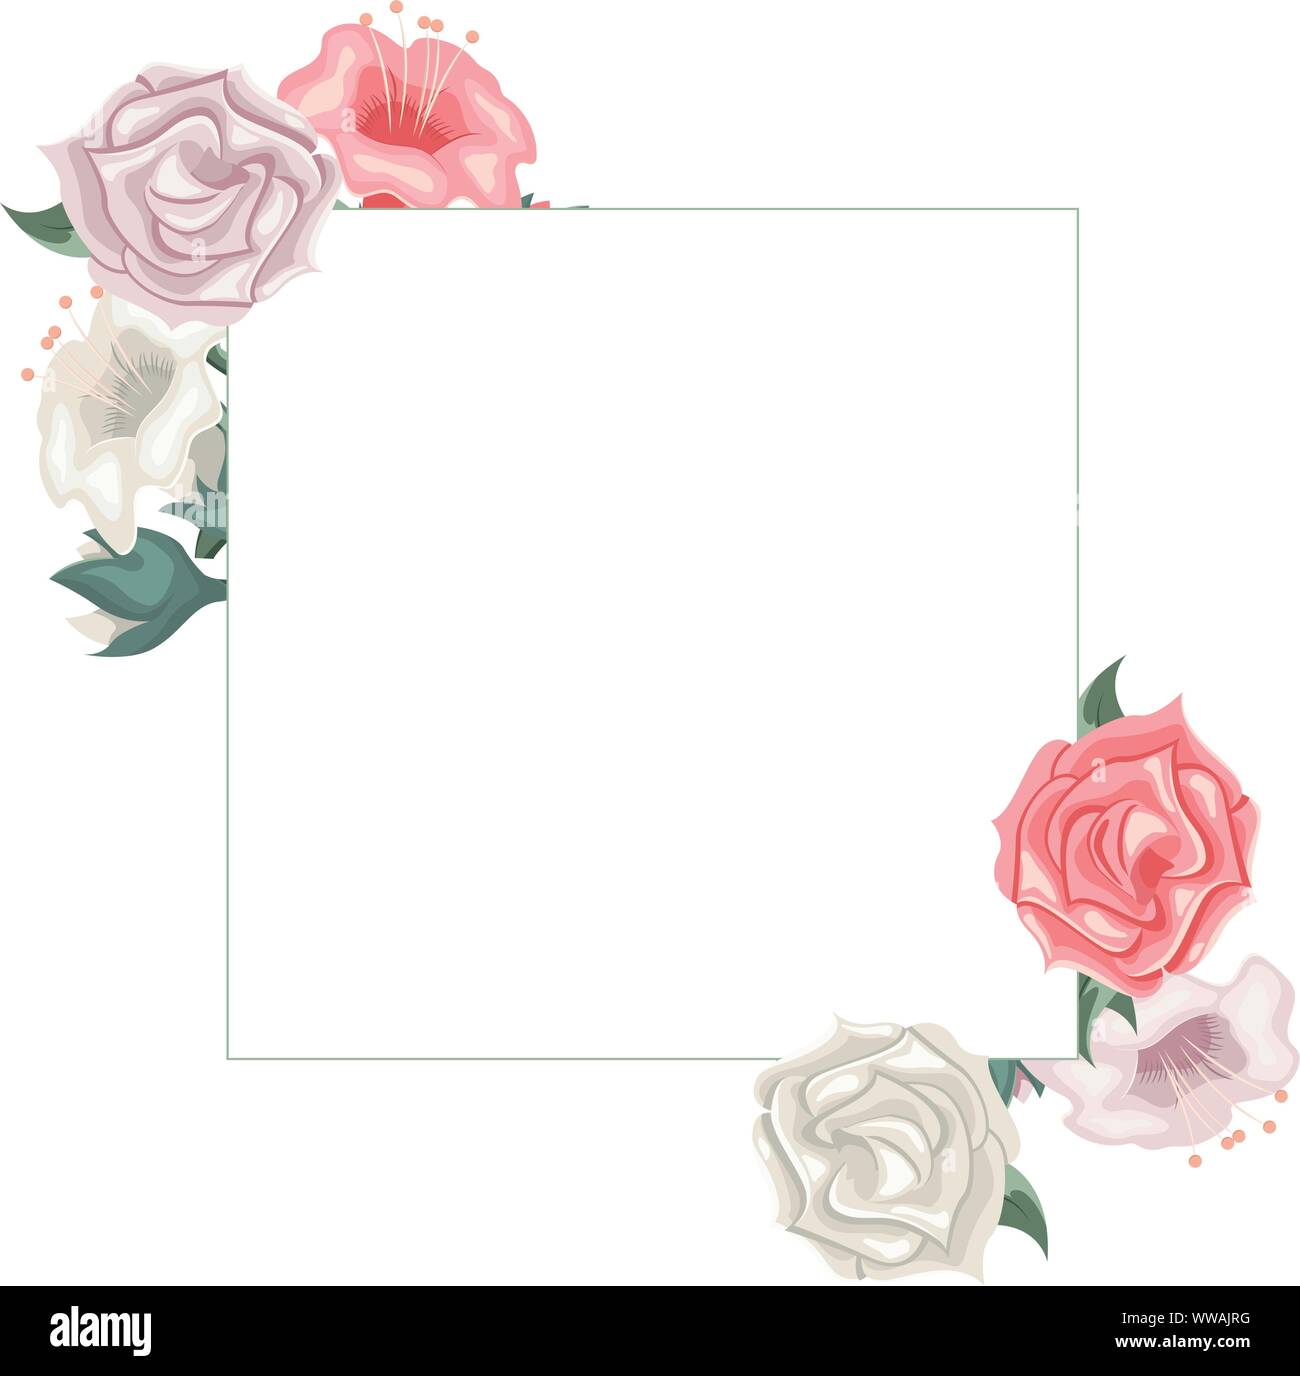 Floral frame with roses and tulips. Floral arrangement Stock Vector